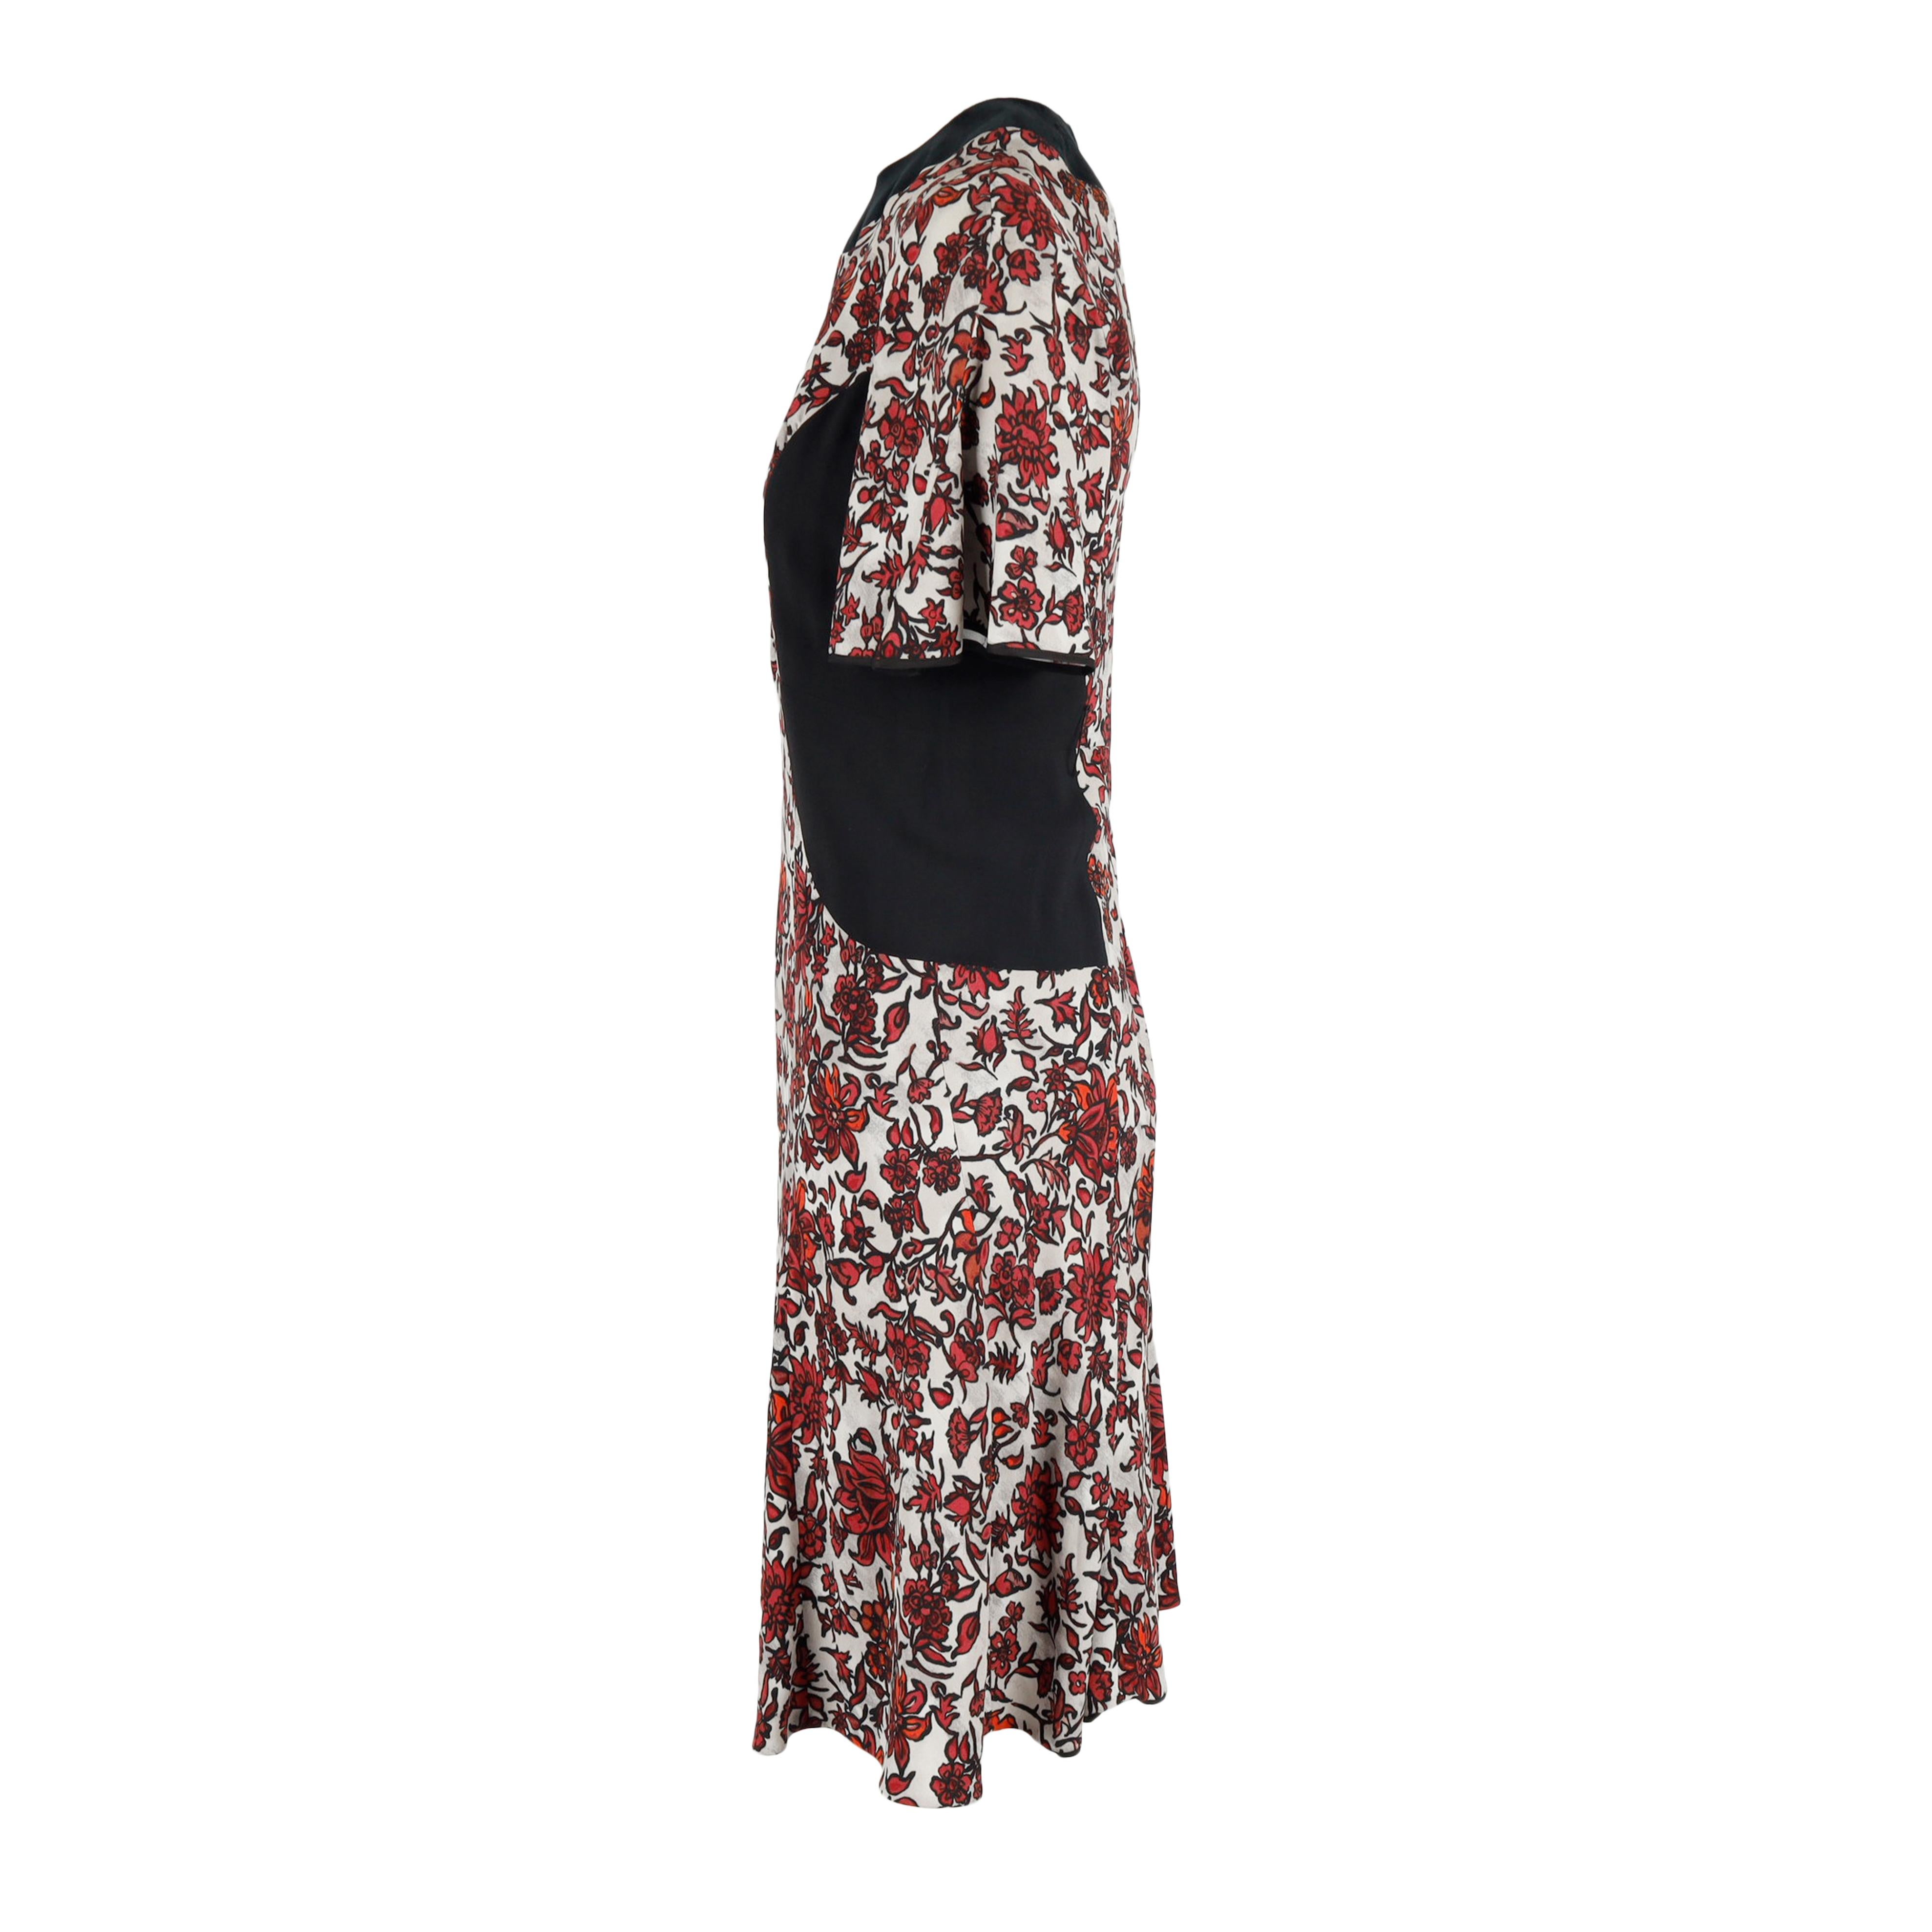 Louis Vuitton Red Black Floral Printed Dress In Excellent Condition For Sale In Milano, IT